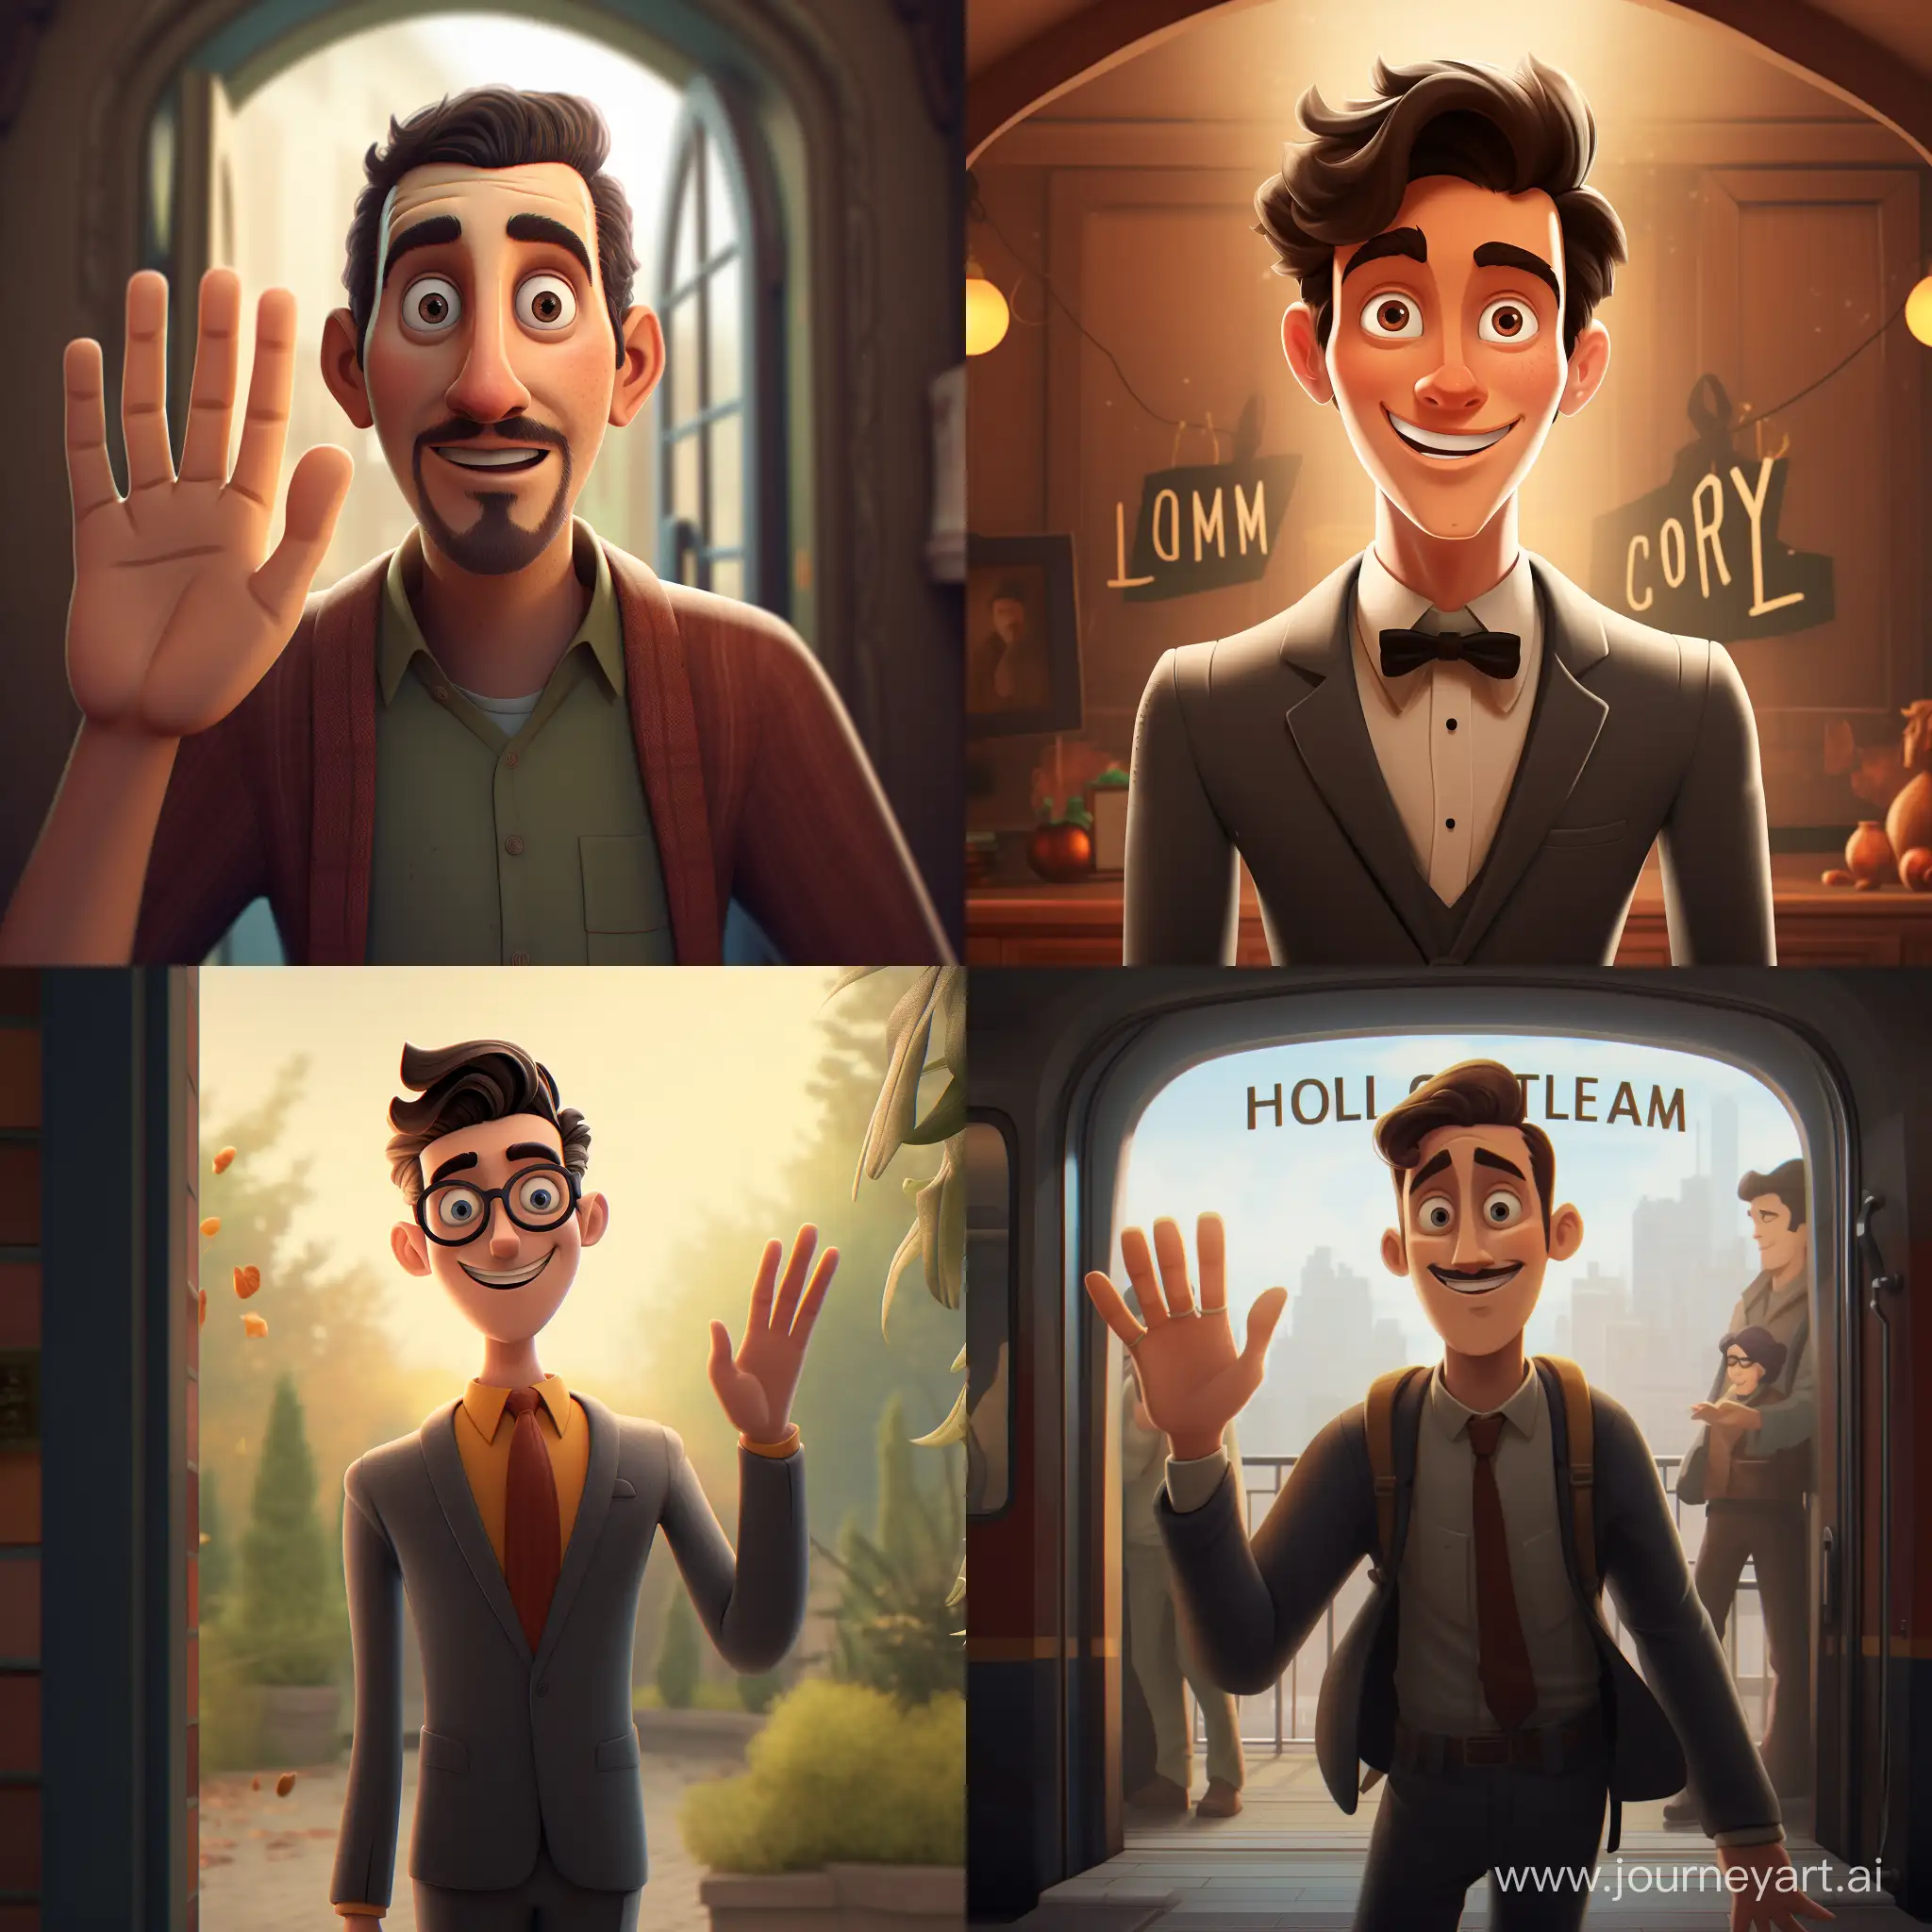 Friendly-Animated-Greeting-Colorful-Man-Saying-Hello